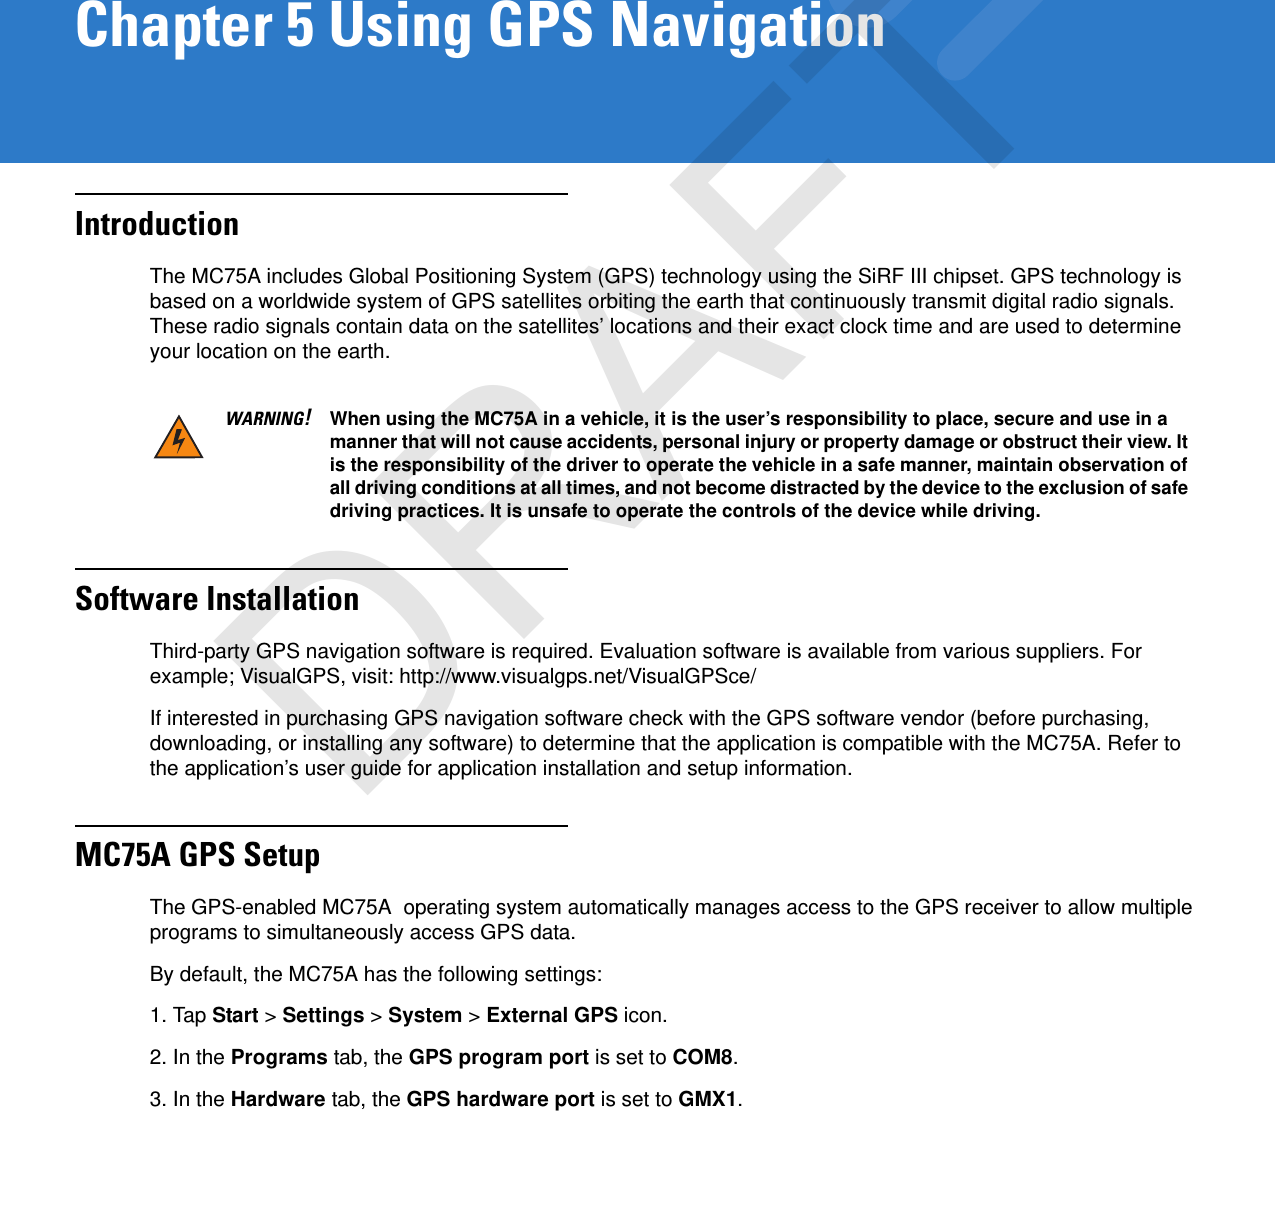 Chapter 5 Using GPS NavigationIntroductionThe MC75A includes Global Positioning System (GPS) technology using the SiRF III chipset. GPS technology is based on a worldwide system of GPS satellites orbiting the earth that continuously transmit digital radio signals. These radio signals contain data on the satellites’ locations and their exact clock time and are used to determine your location on the earth.Software InstallationThird-party GPS navigation software is required. Evaluation software is available from various suppliers. For example; VisualGPS, visit: http://www.visualgps.net/VisualGPSce/If interested in purchasing GPS navigation software check with the GPS software vendor (before purchasing, downloading, or installing any software) to determine that the application is compatible with the MC75A. Refer to the application’s user guide for application installation and setup information.MC75A GPS SetupThe GPS-enabled MC75A  operating system automatically manages access to the GPS receiver to allow multiple programs to simultaneously access GPS data.By default, the MC75A has the following settings:1. Tap Start &gt; Settings &gt; System &gt; External GPS icon.2. In the Programs tab, the GPS program port is set to COM8.3. In the Hardware tab, the GPS hardware port is set to GMX1.WARNING!When using the MC75A in a vehicle, it is the user’s responsibility to place, secure and use in a manner that will not cause accidents, personal injury or property damage or obstruct their view. It is the responsibility of the driver to operate the vehicle in a safe manner, maintain observation of all driving conditions at all times, and not become distracted by the device to the exclusion of safe driving practices. It is unsafe to operate the controls of the device while driving.DRAFT